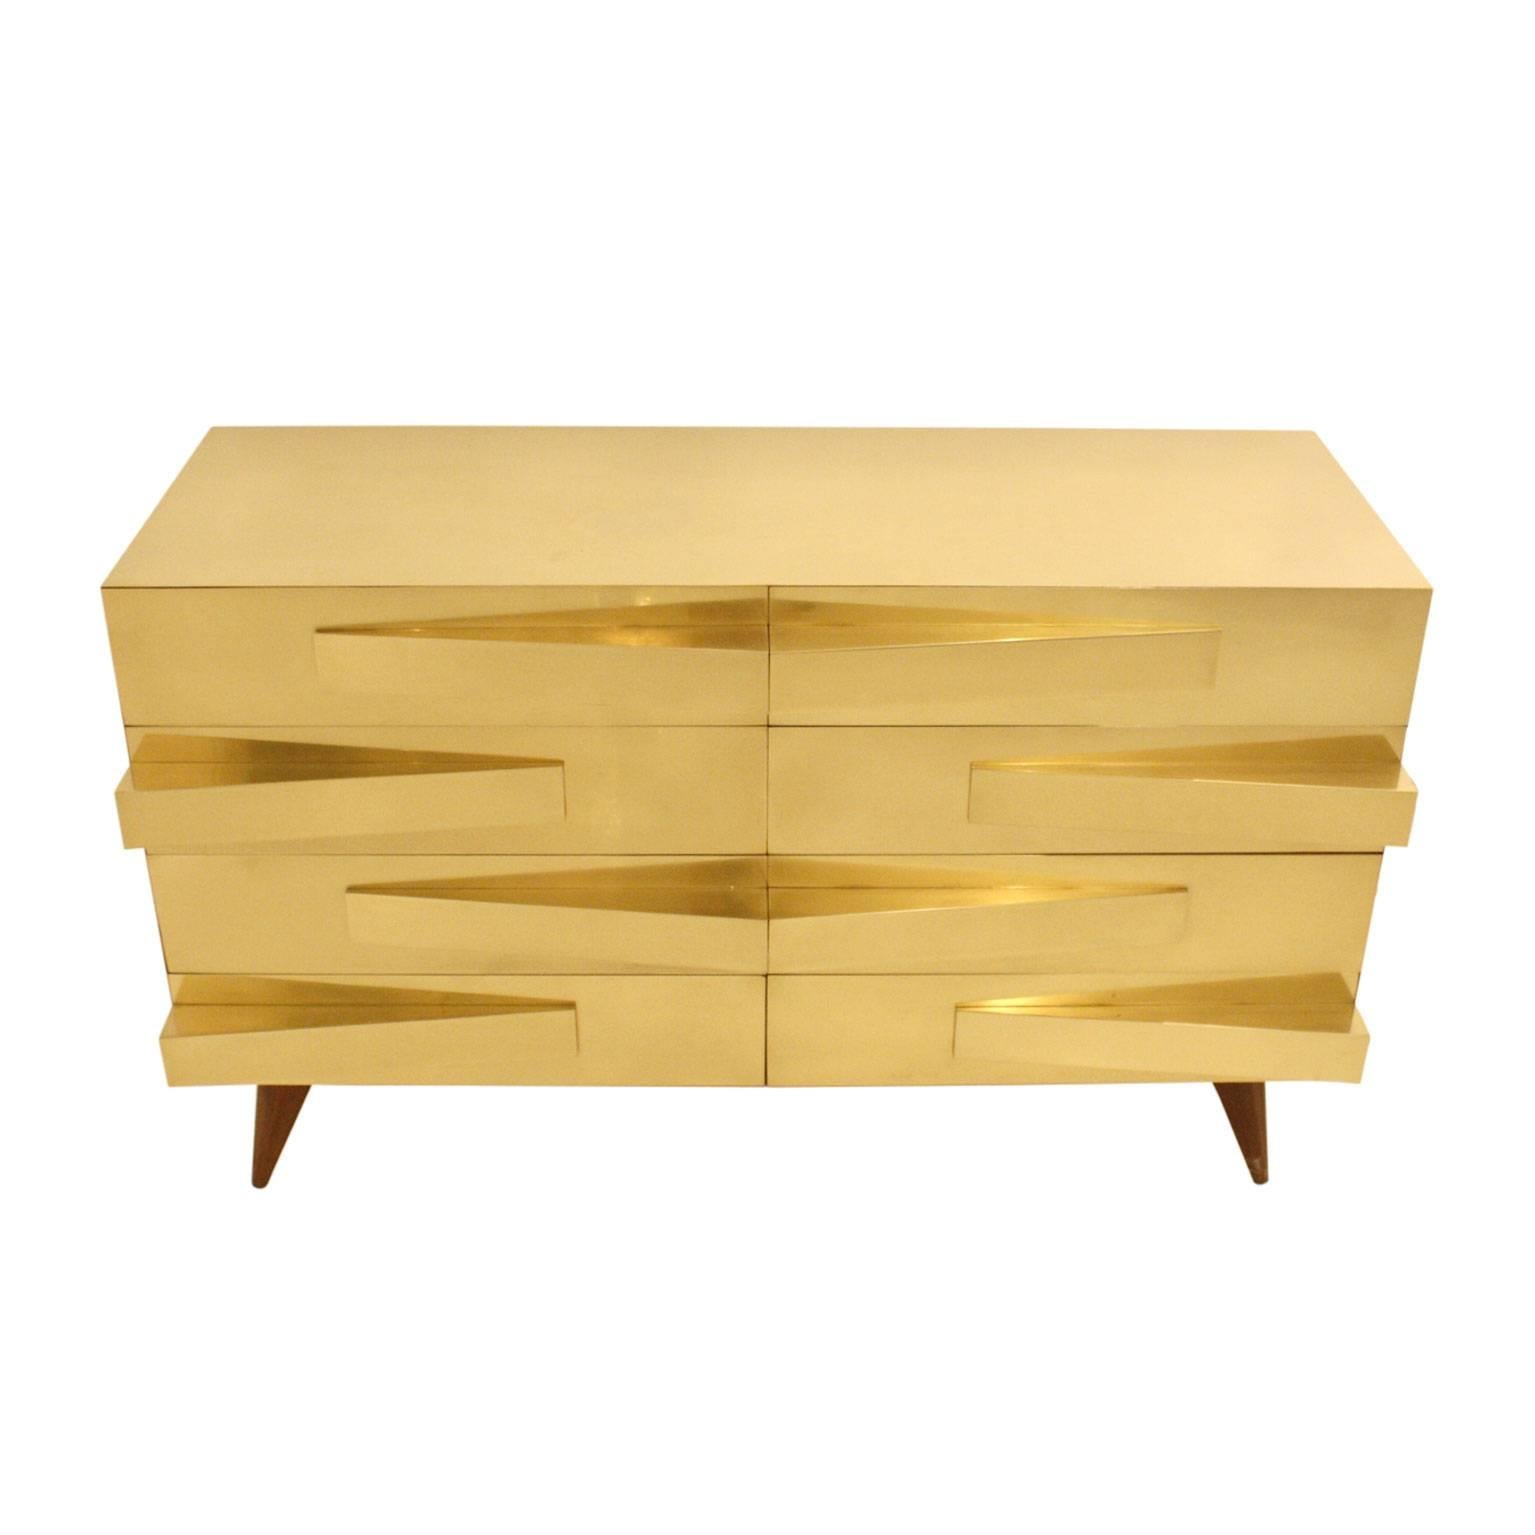 Pair of chests of drawers in Gio Ponti style. Made of solid wood structure covered in brass.

Our main target is customer satisfaction, so we include in the price for this item professional and custom made packing.
 